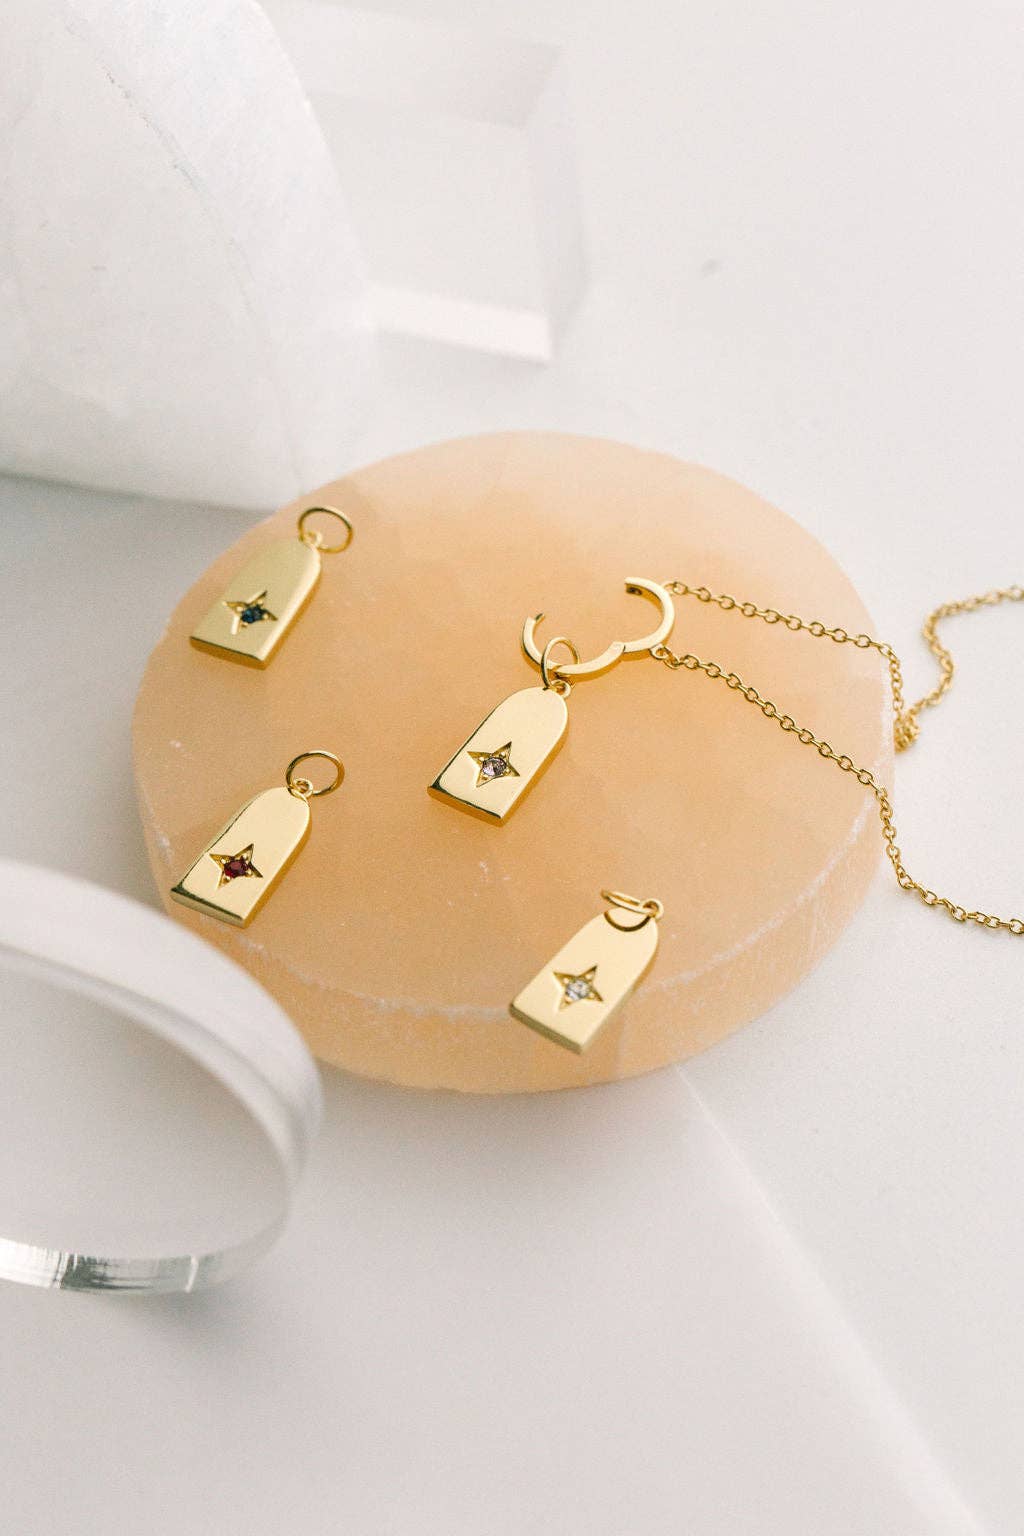 Birthstone Charm Necklace in Gold: